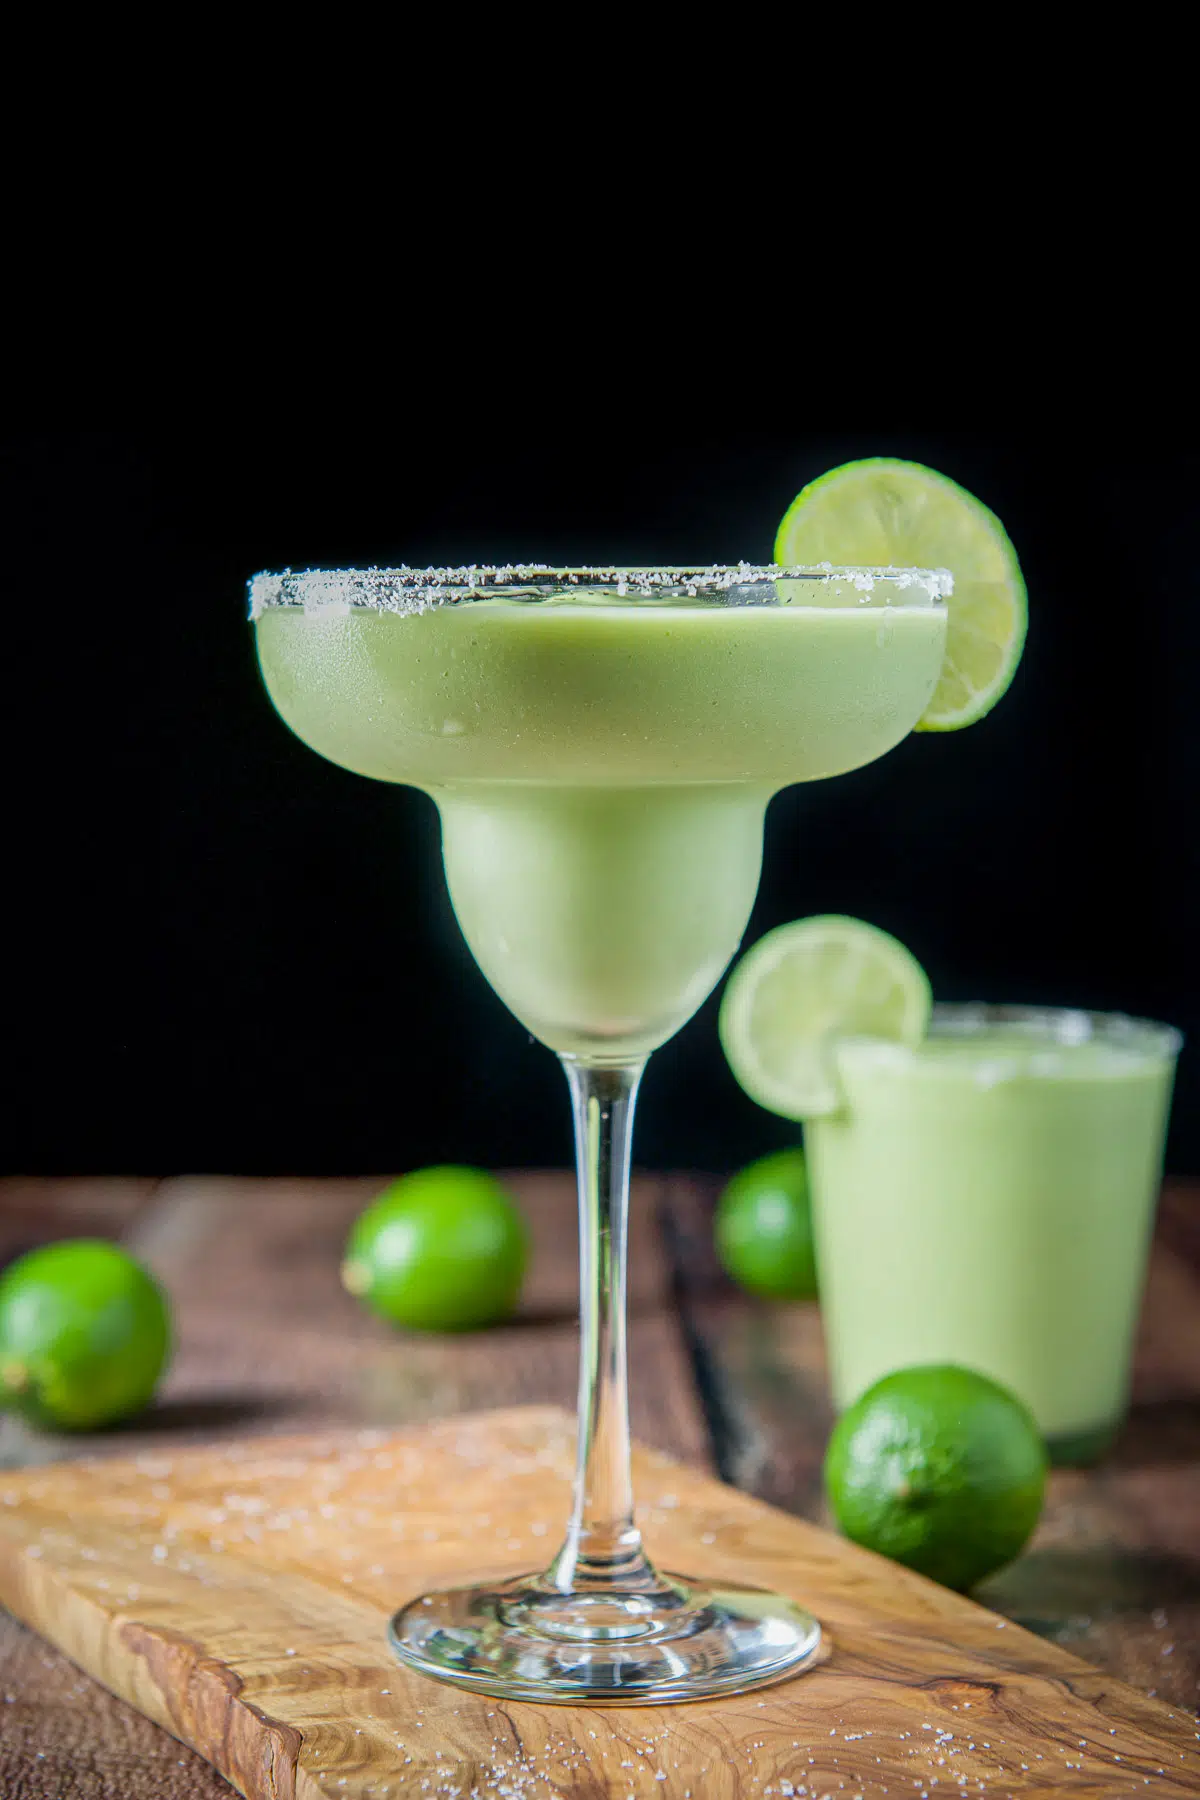 Vertical view of a creamy green drinks with limes on the board